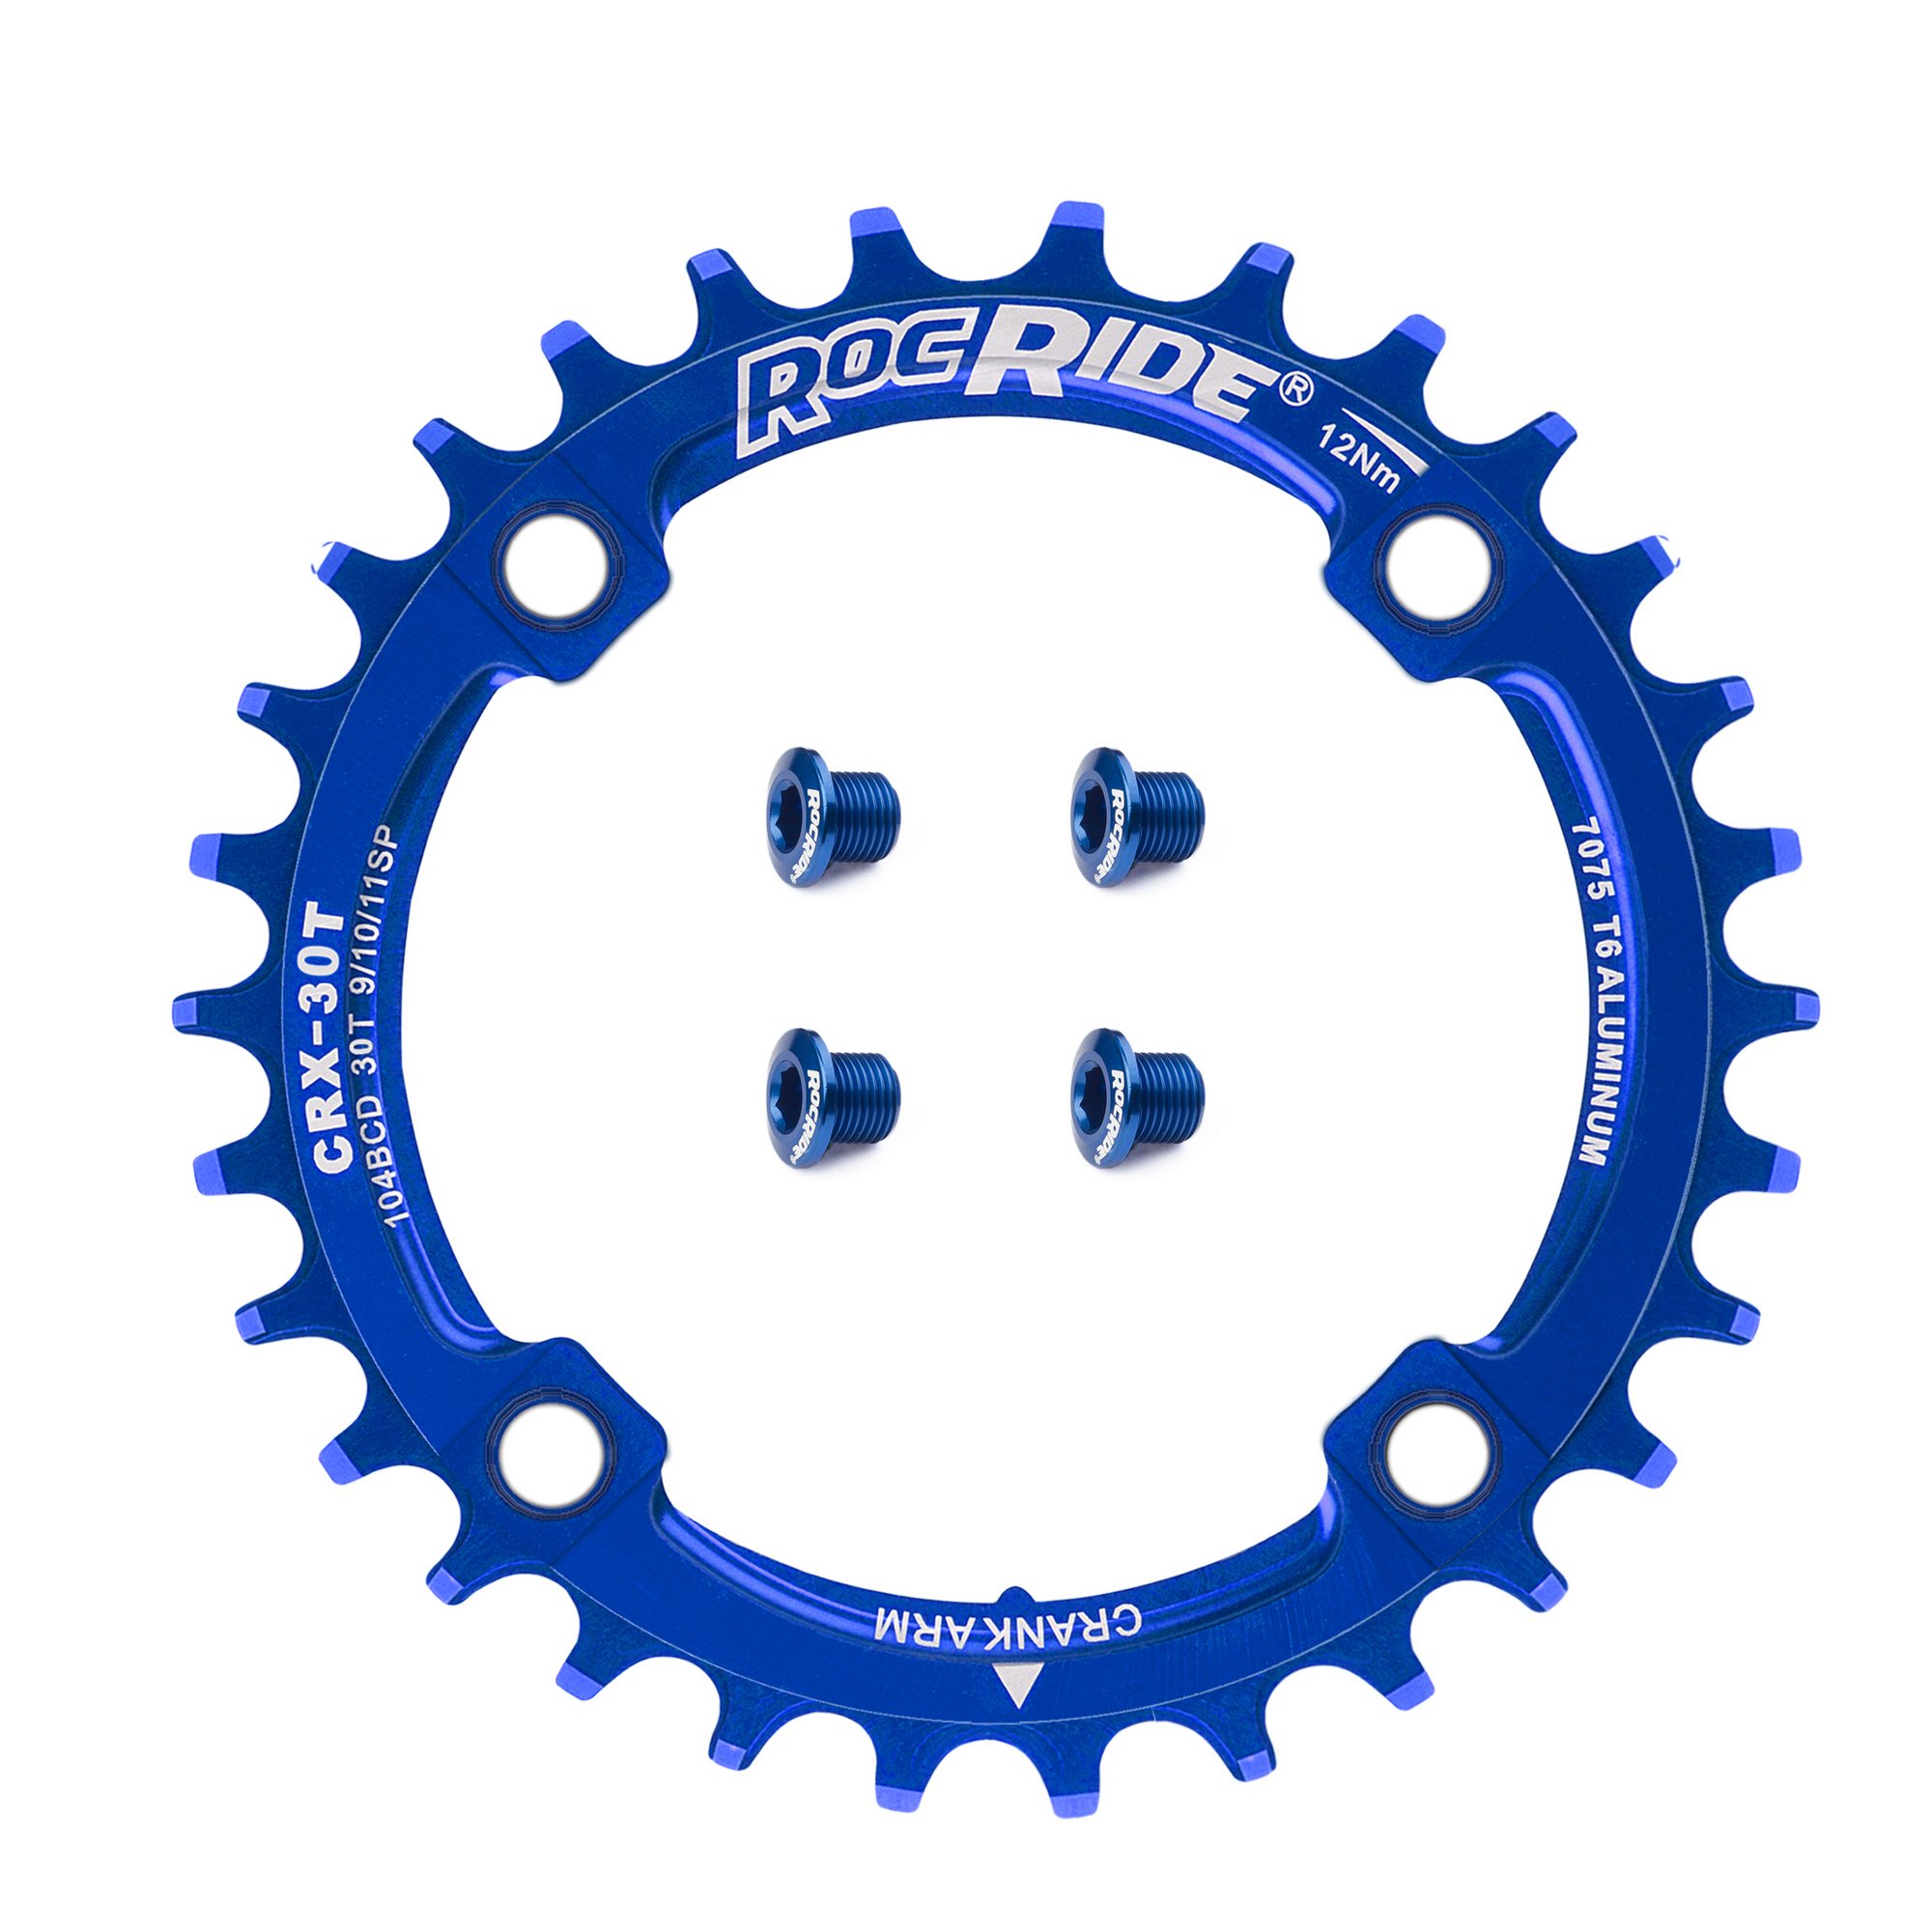 30T Narrow Wide Chainring 104 BCD Blue Aluminum With 4 Blue Aluminum Bolts By RocRide For 9/10/11 Speed. - image 1 of 5